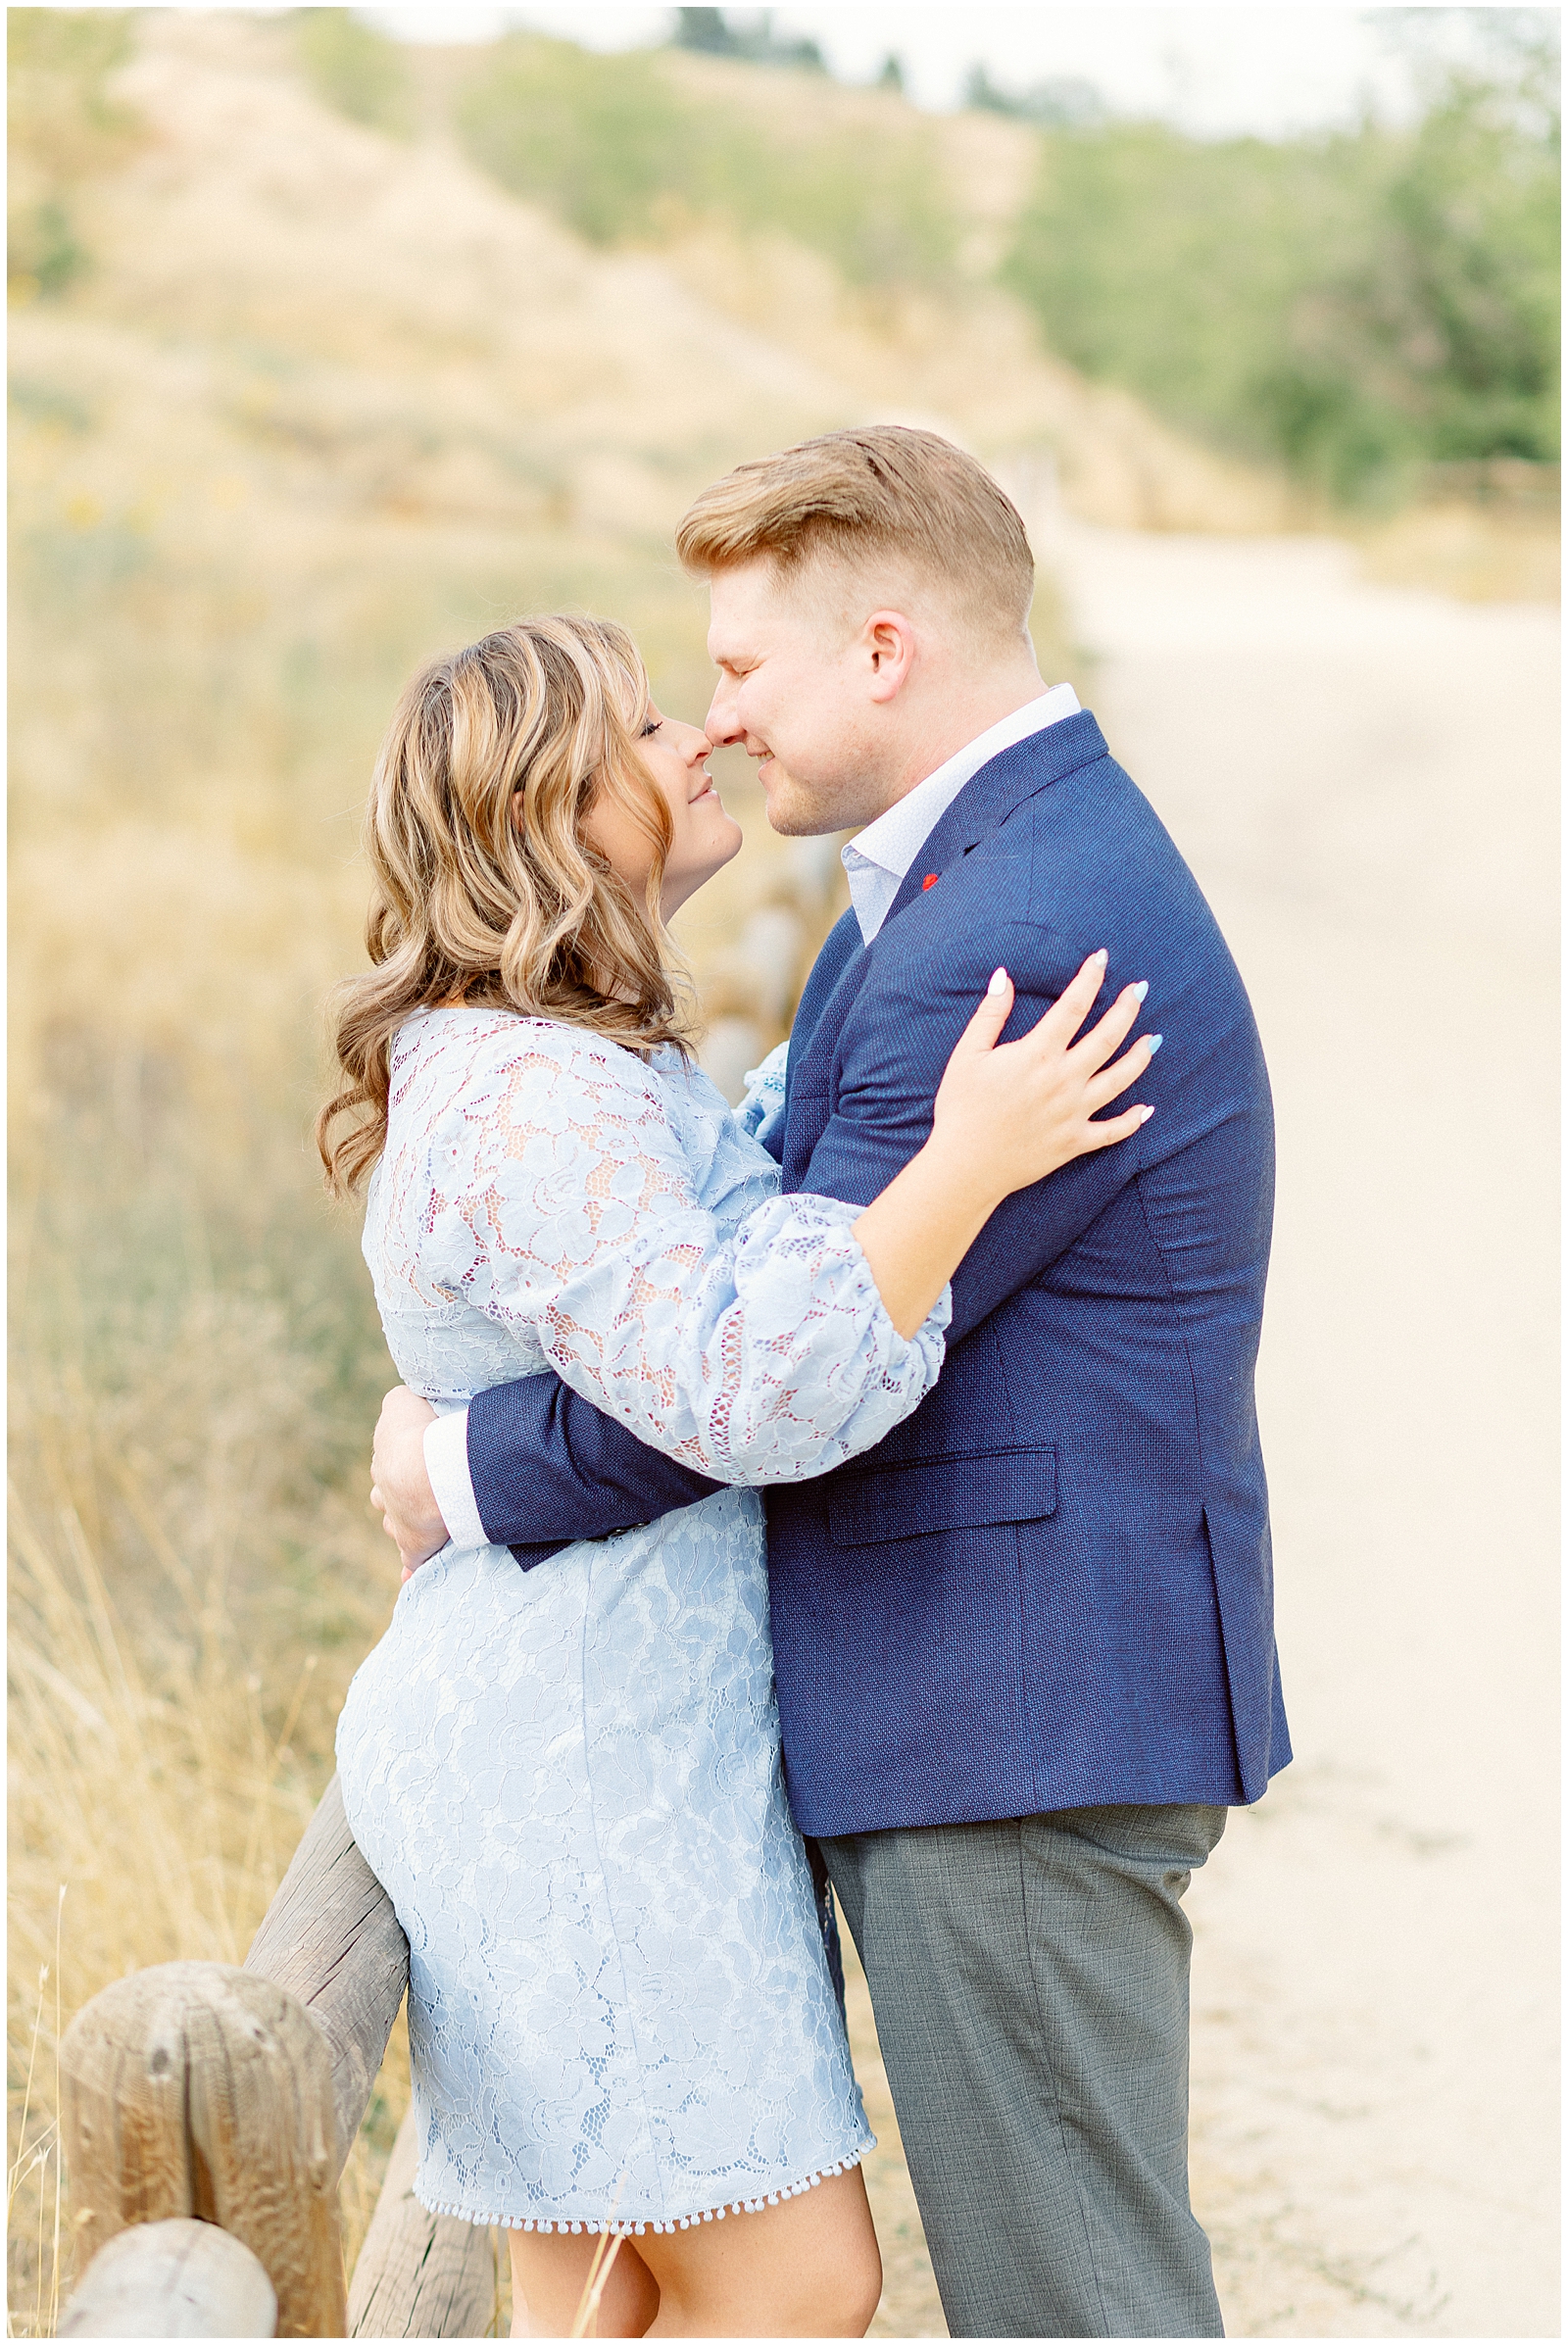 Fall Boise Foothills Engagement Session by Karli and David Photography